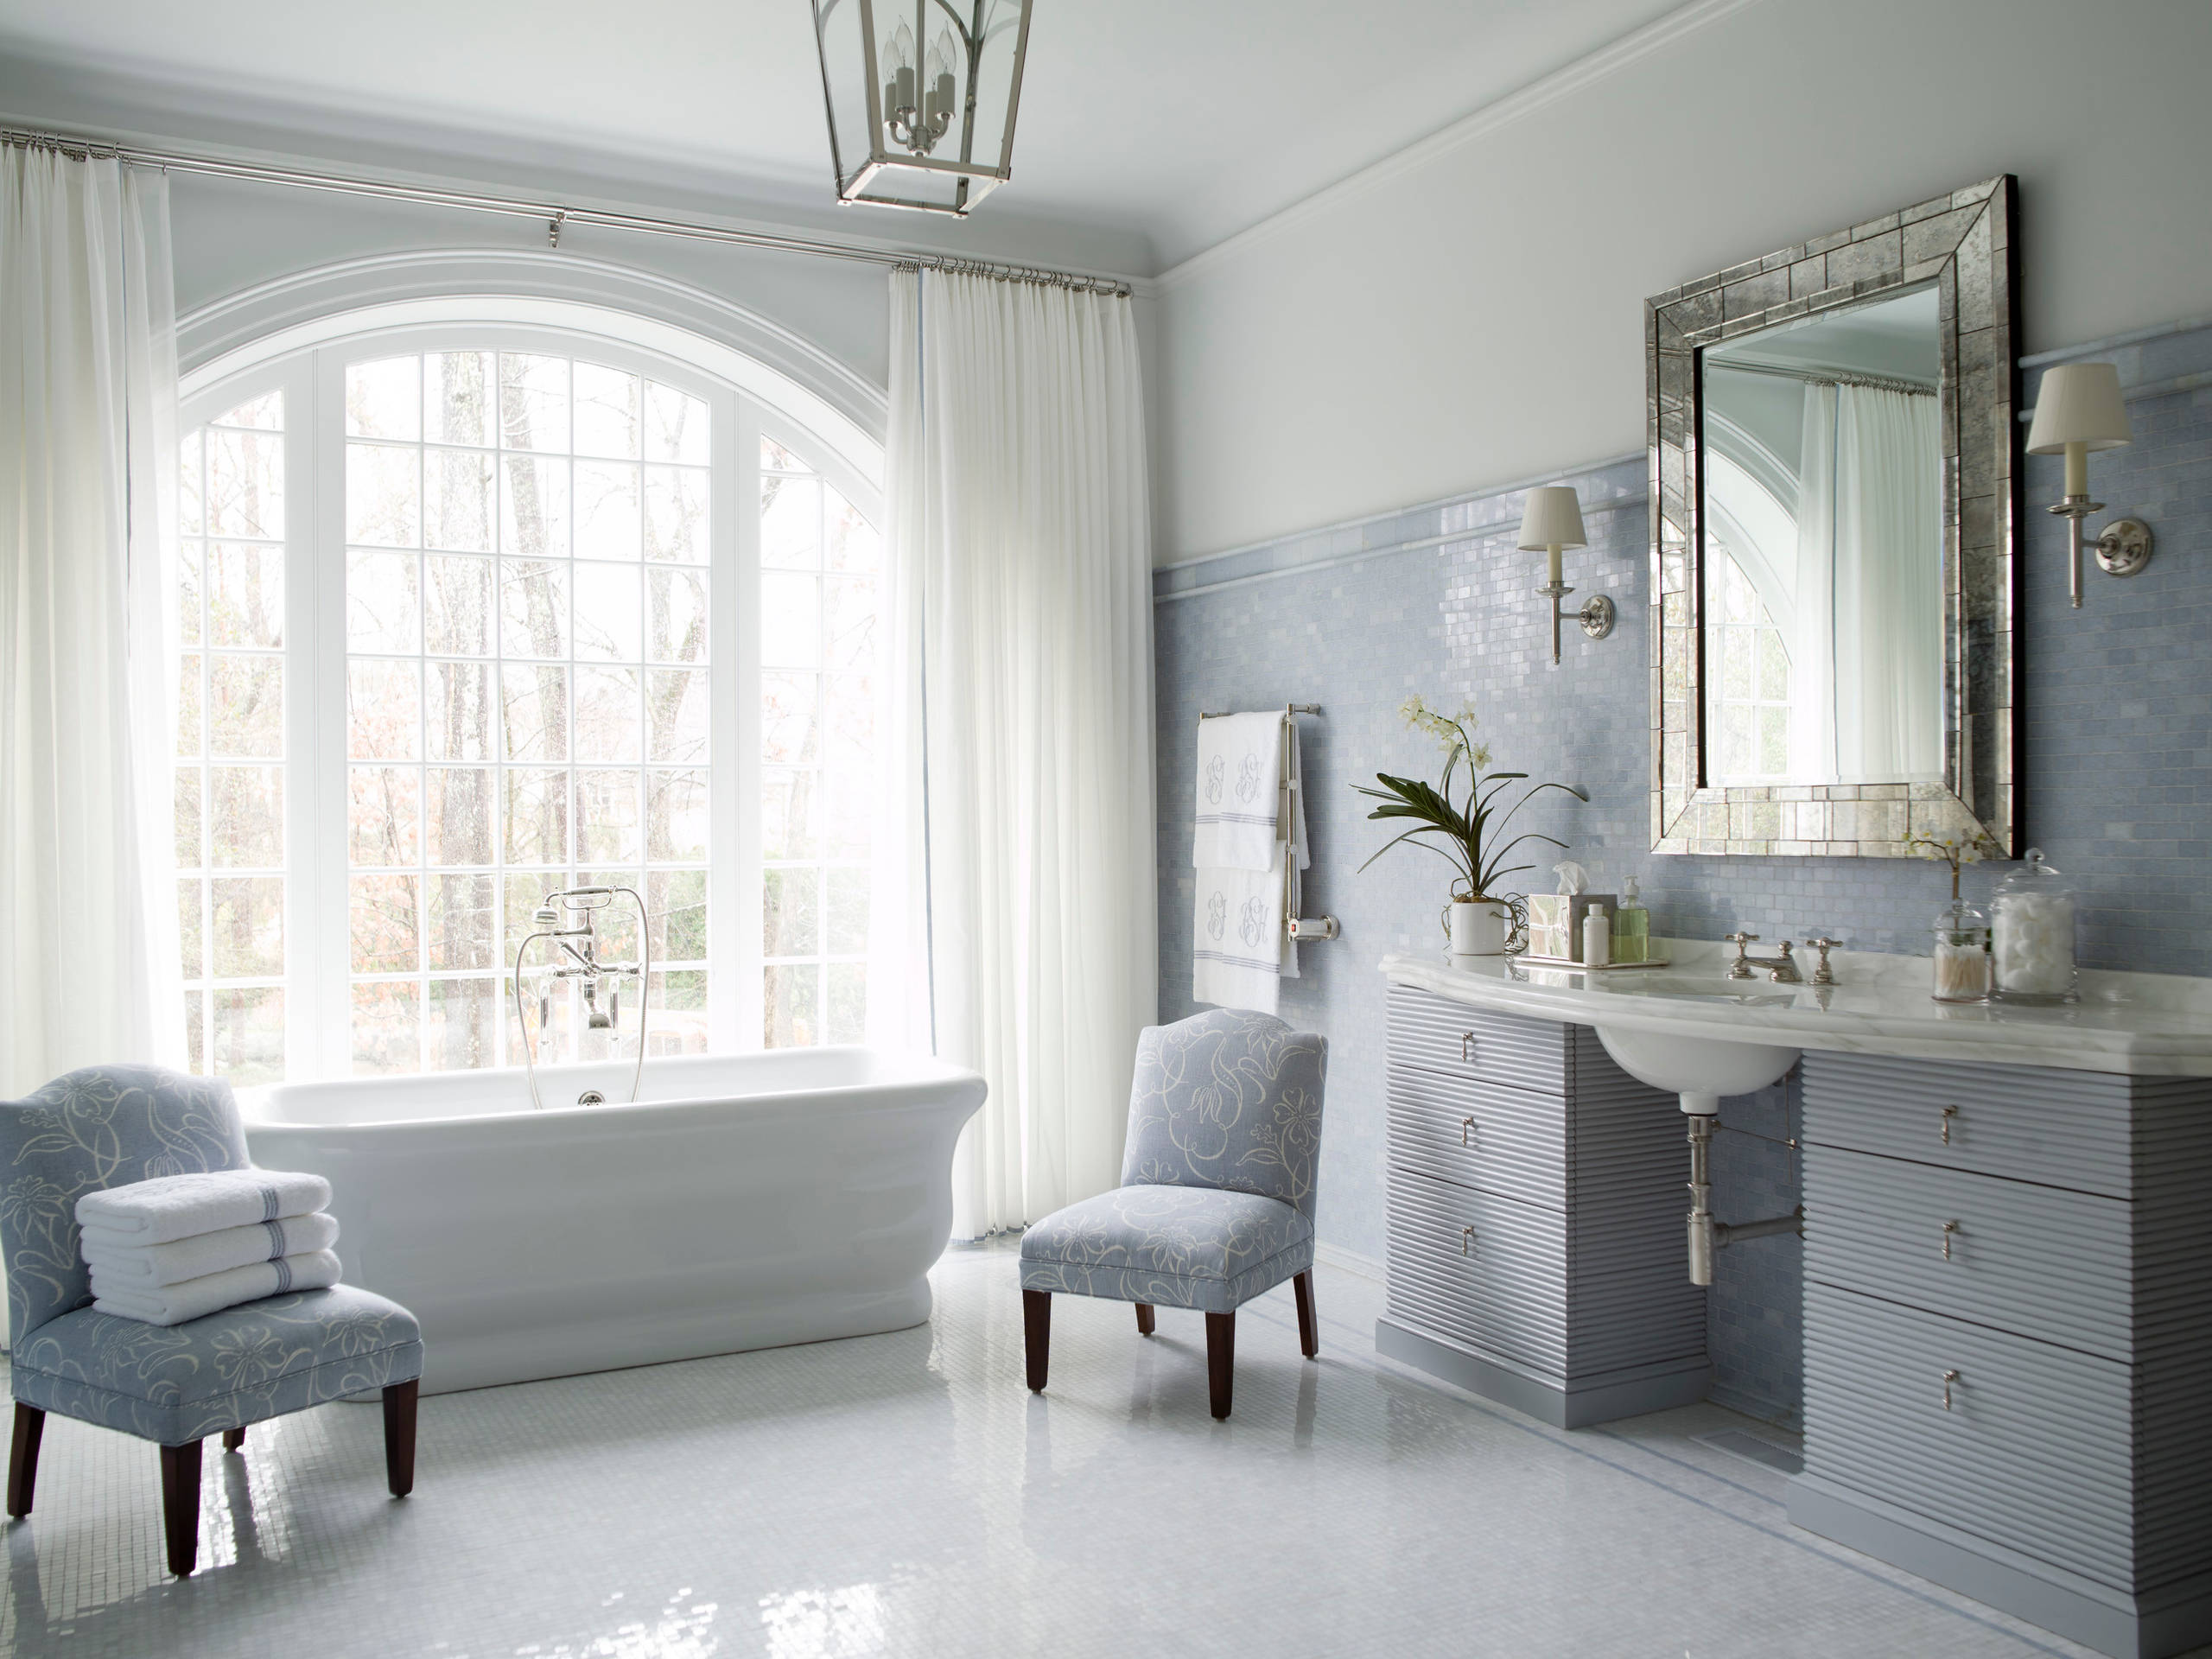 light blue bathroom in traditional style, featured in home tour